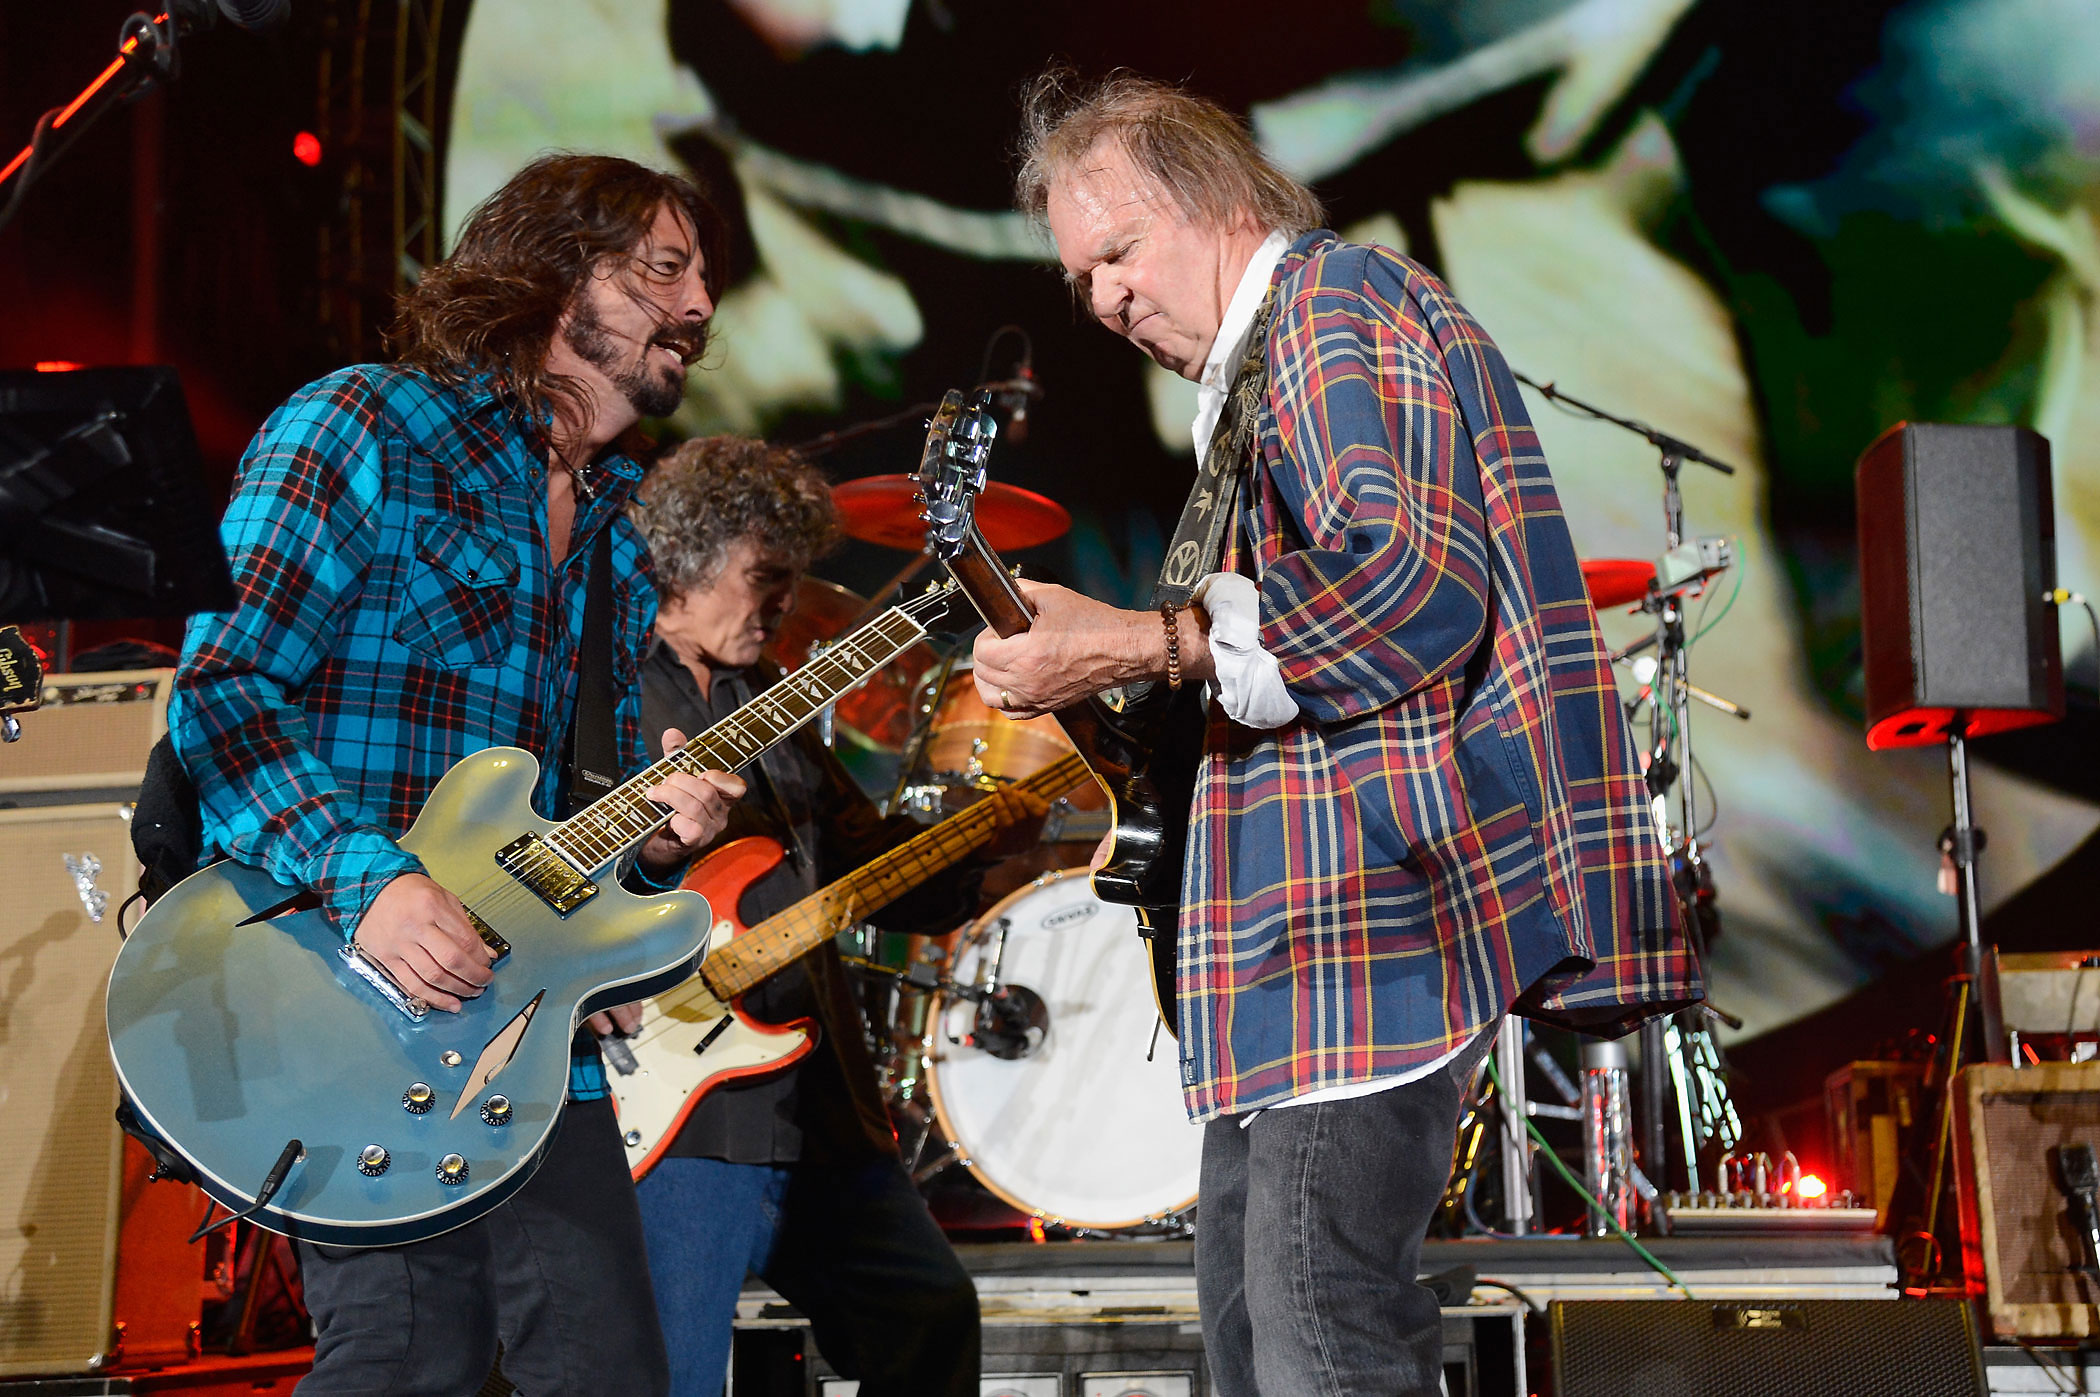 Dave Grohl and  Neil Young perform onstage at The Global Citizen Festival in Central Park to end extreme poverty on the Great Lawn on September 29, 2012 in New York City.